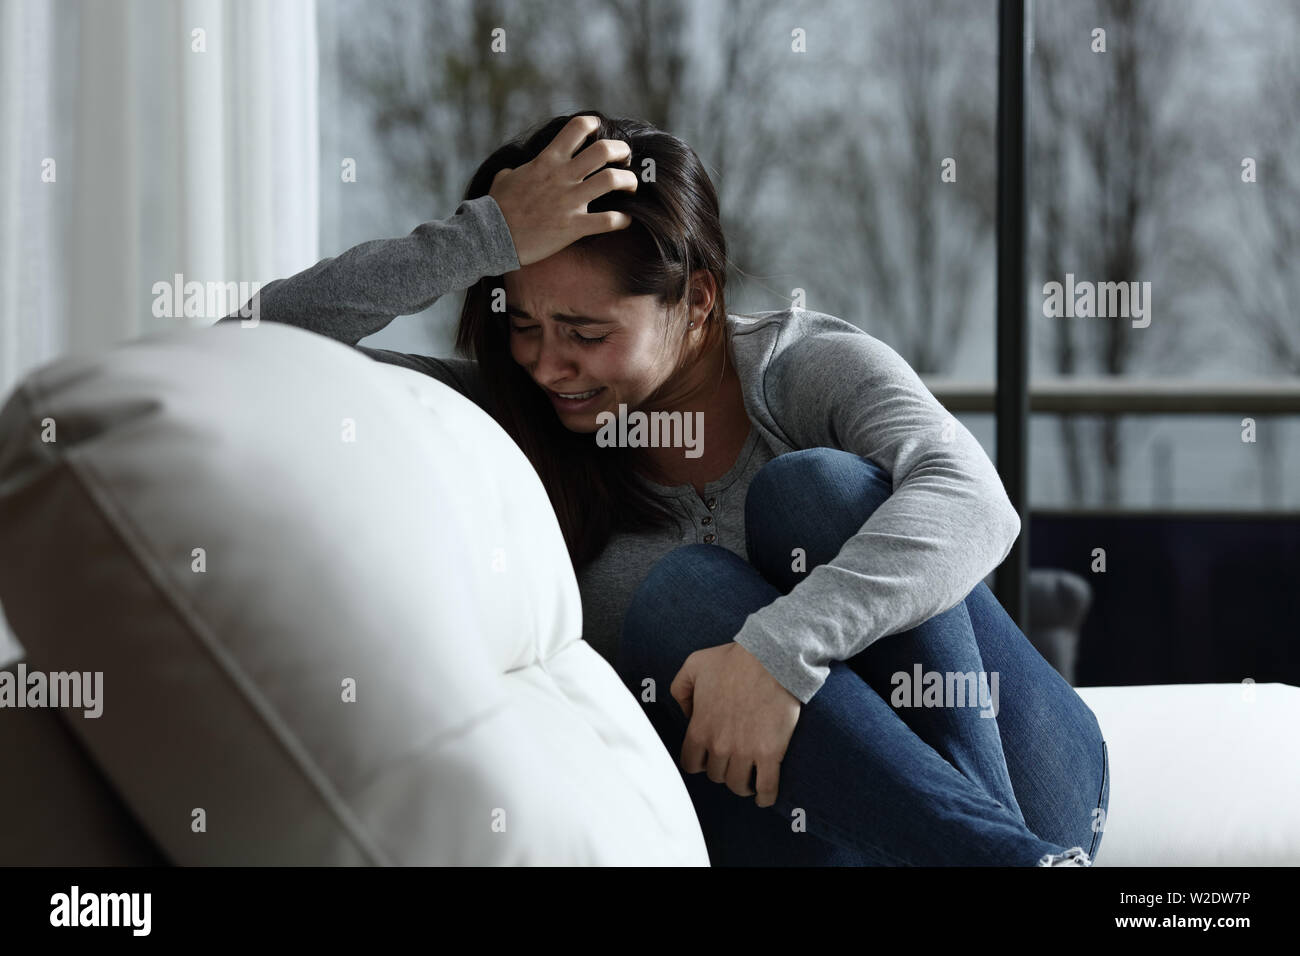 Sad woman complaining and crying sitting on a couch in the living room at home Stock Photo